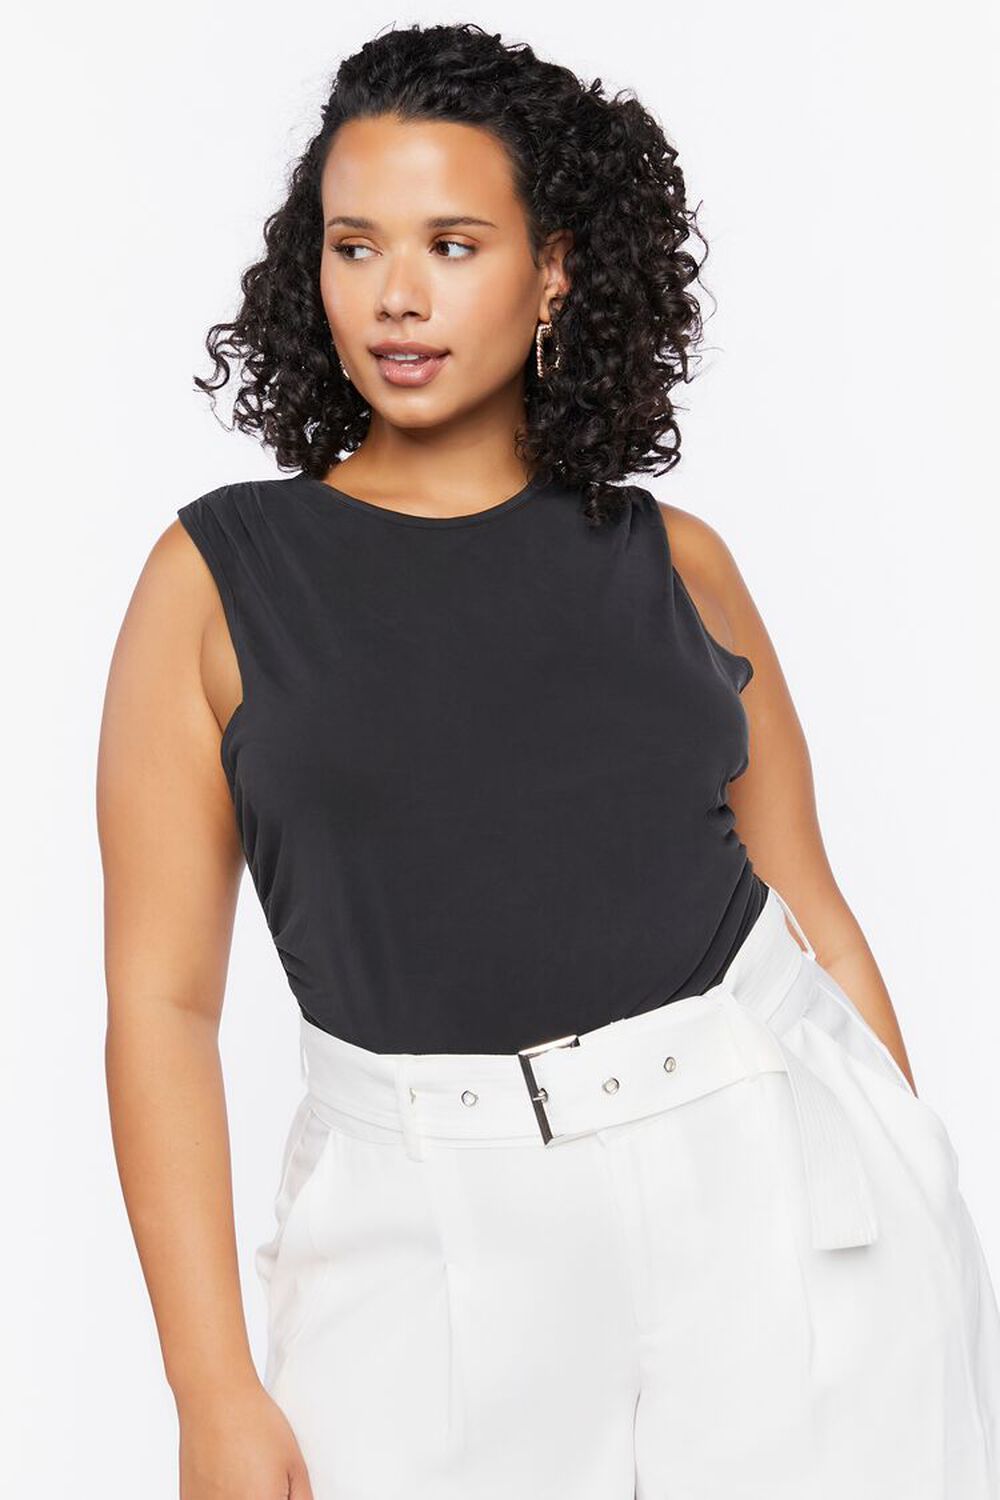 BLACK Plus Size Sleeveless Ruched Top, image 1